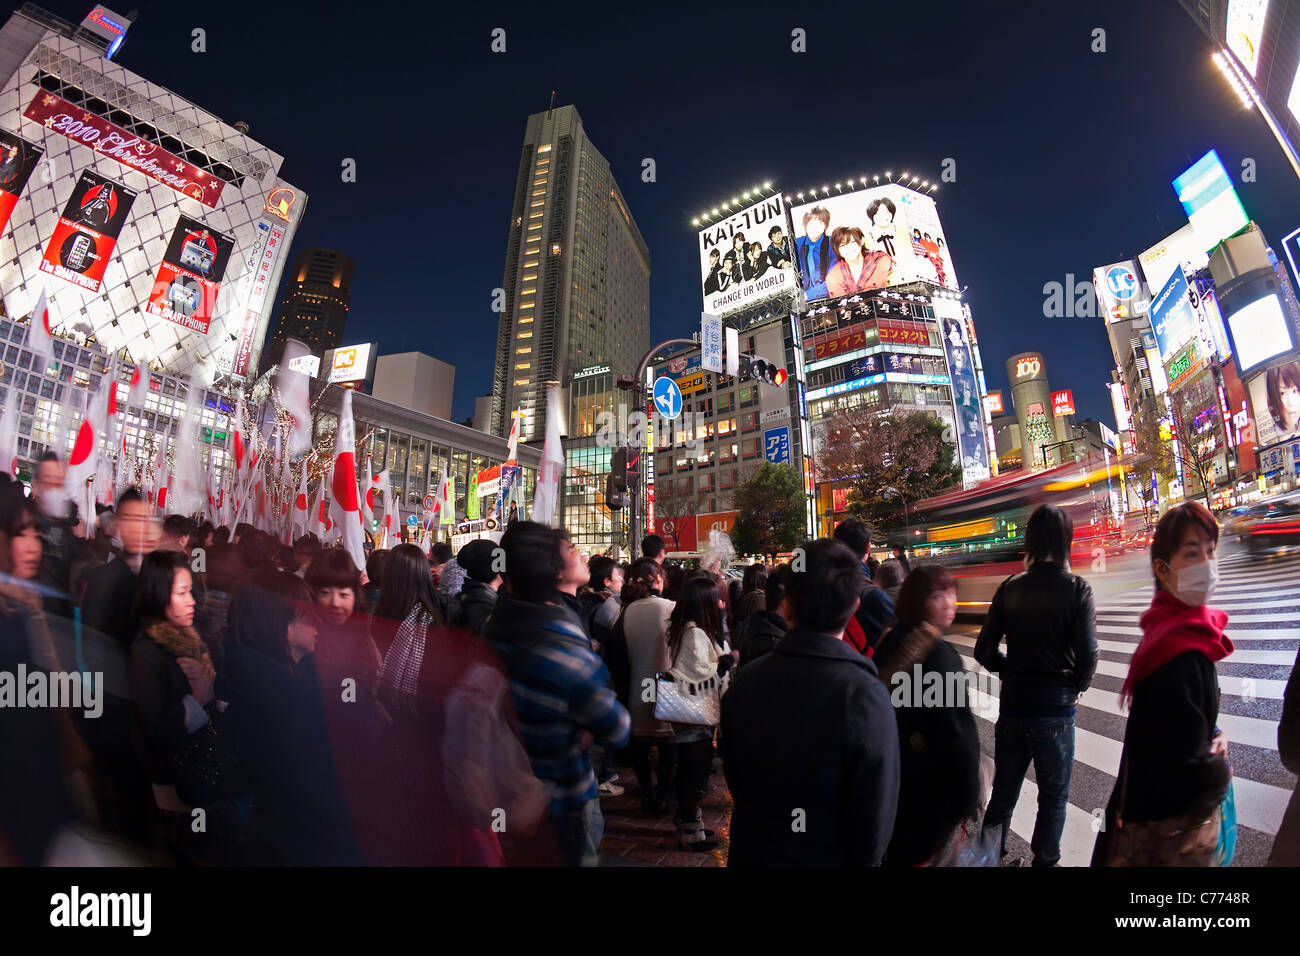 Asia, Japan, Tokyo, Shibuya, Shibuya Crossing - crowds of people crossing the famous intersection Stock Photo